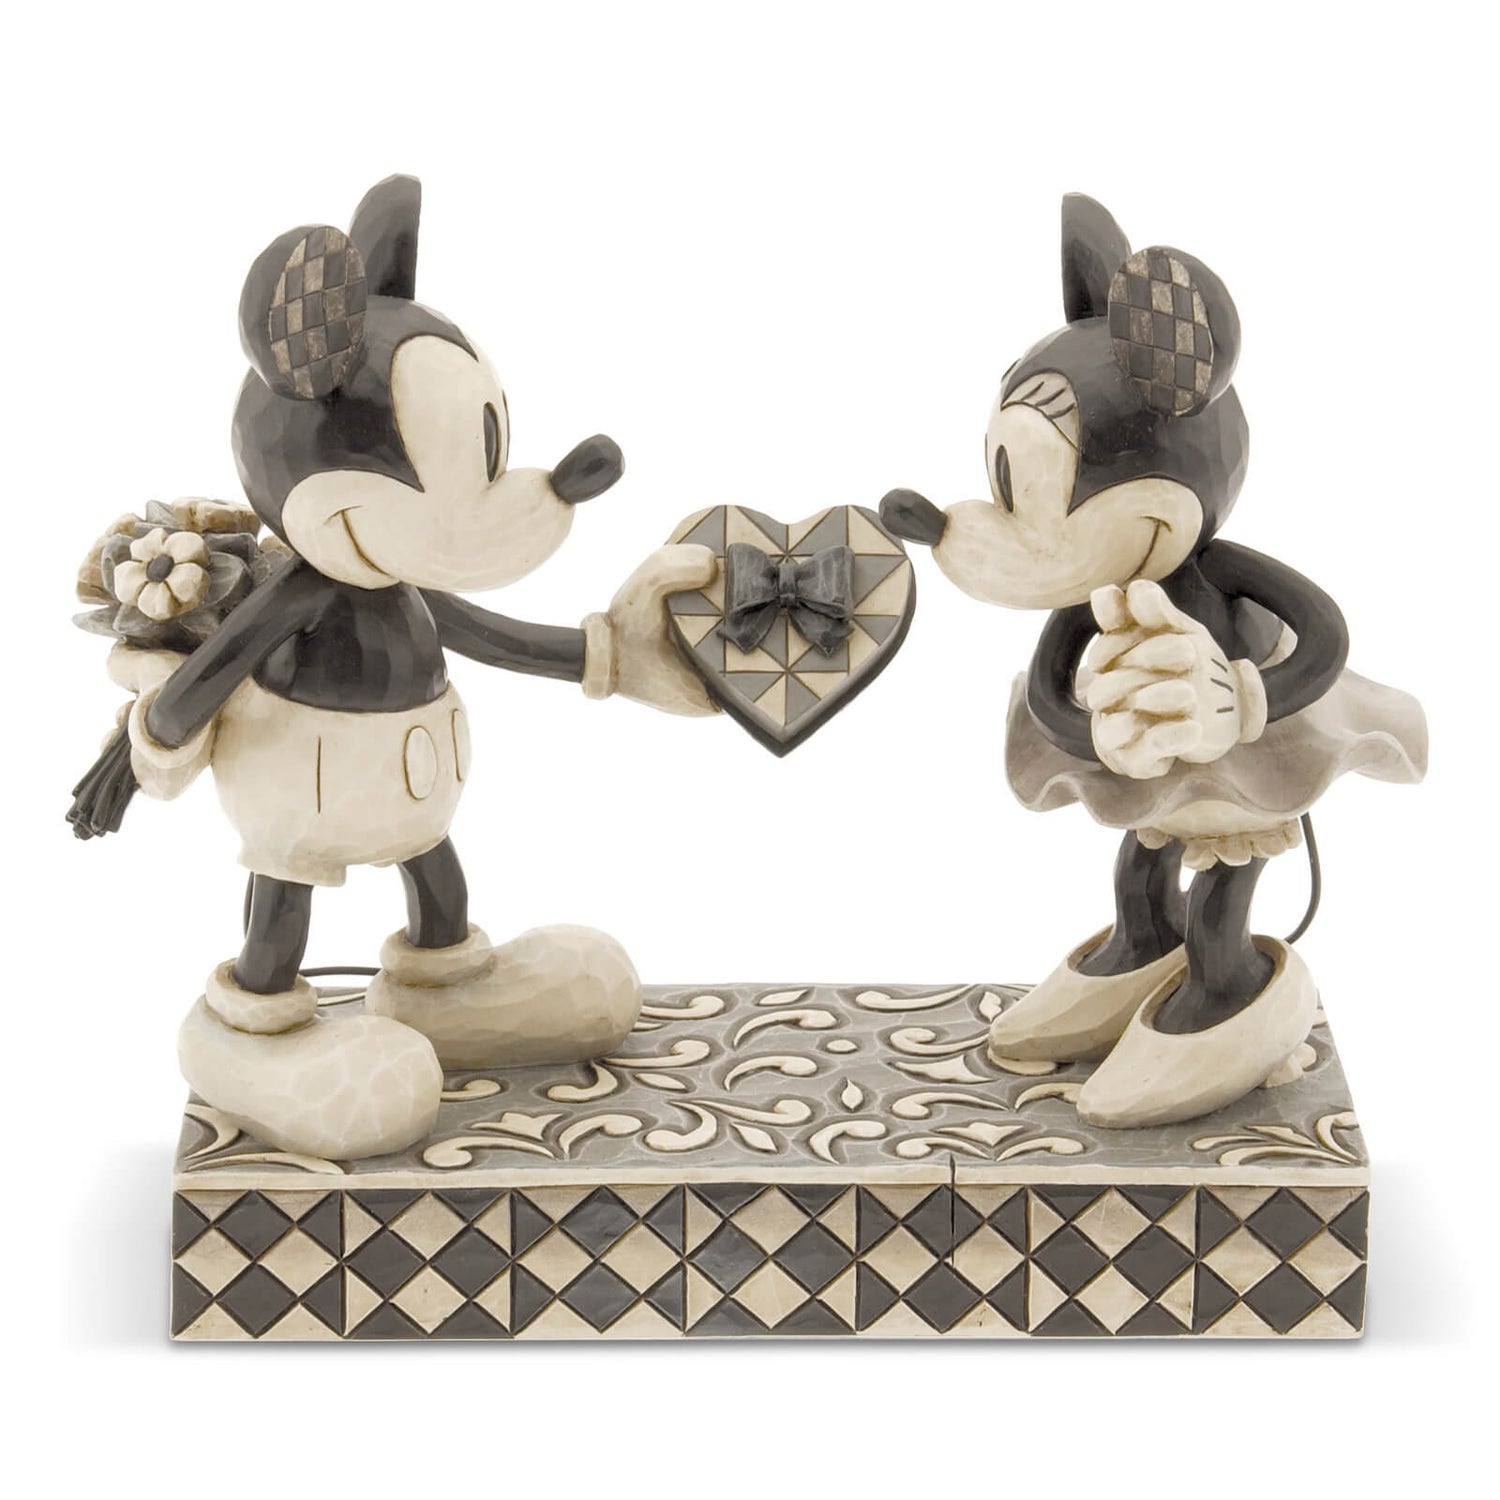 Disney Traditions Real Sweetheart Mickey & Minnie Black and White Figurine